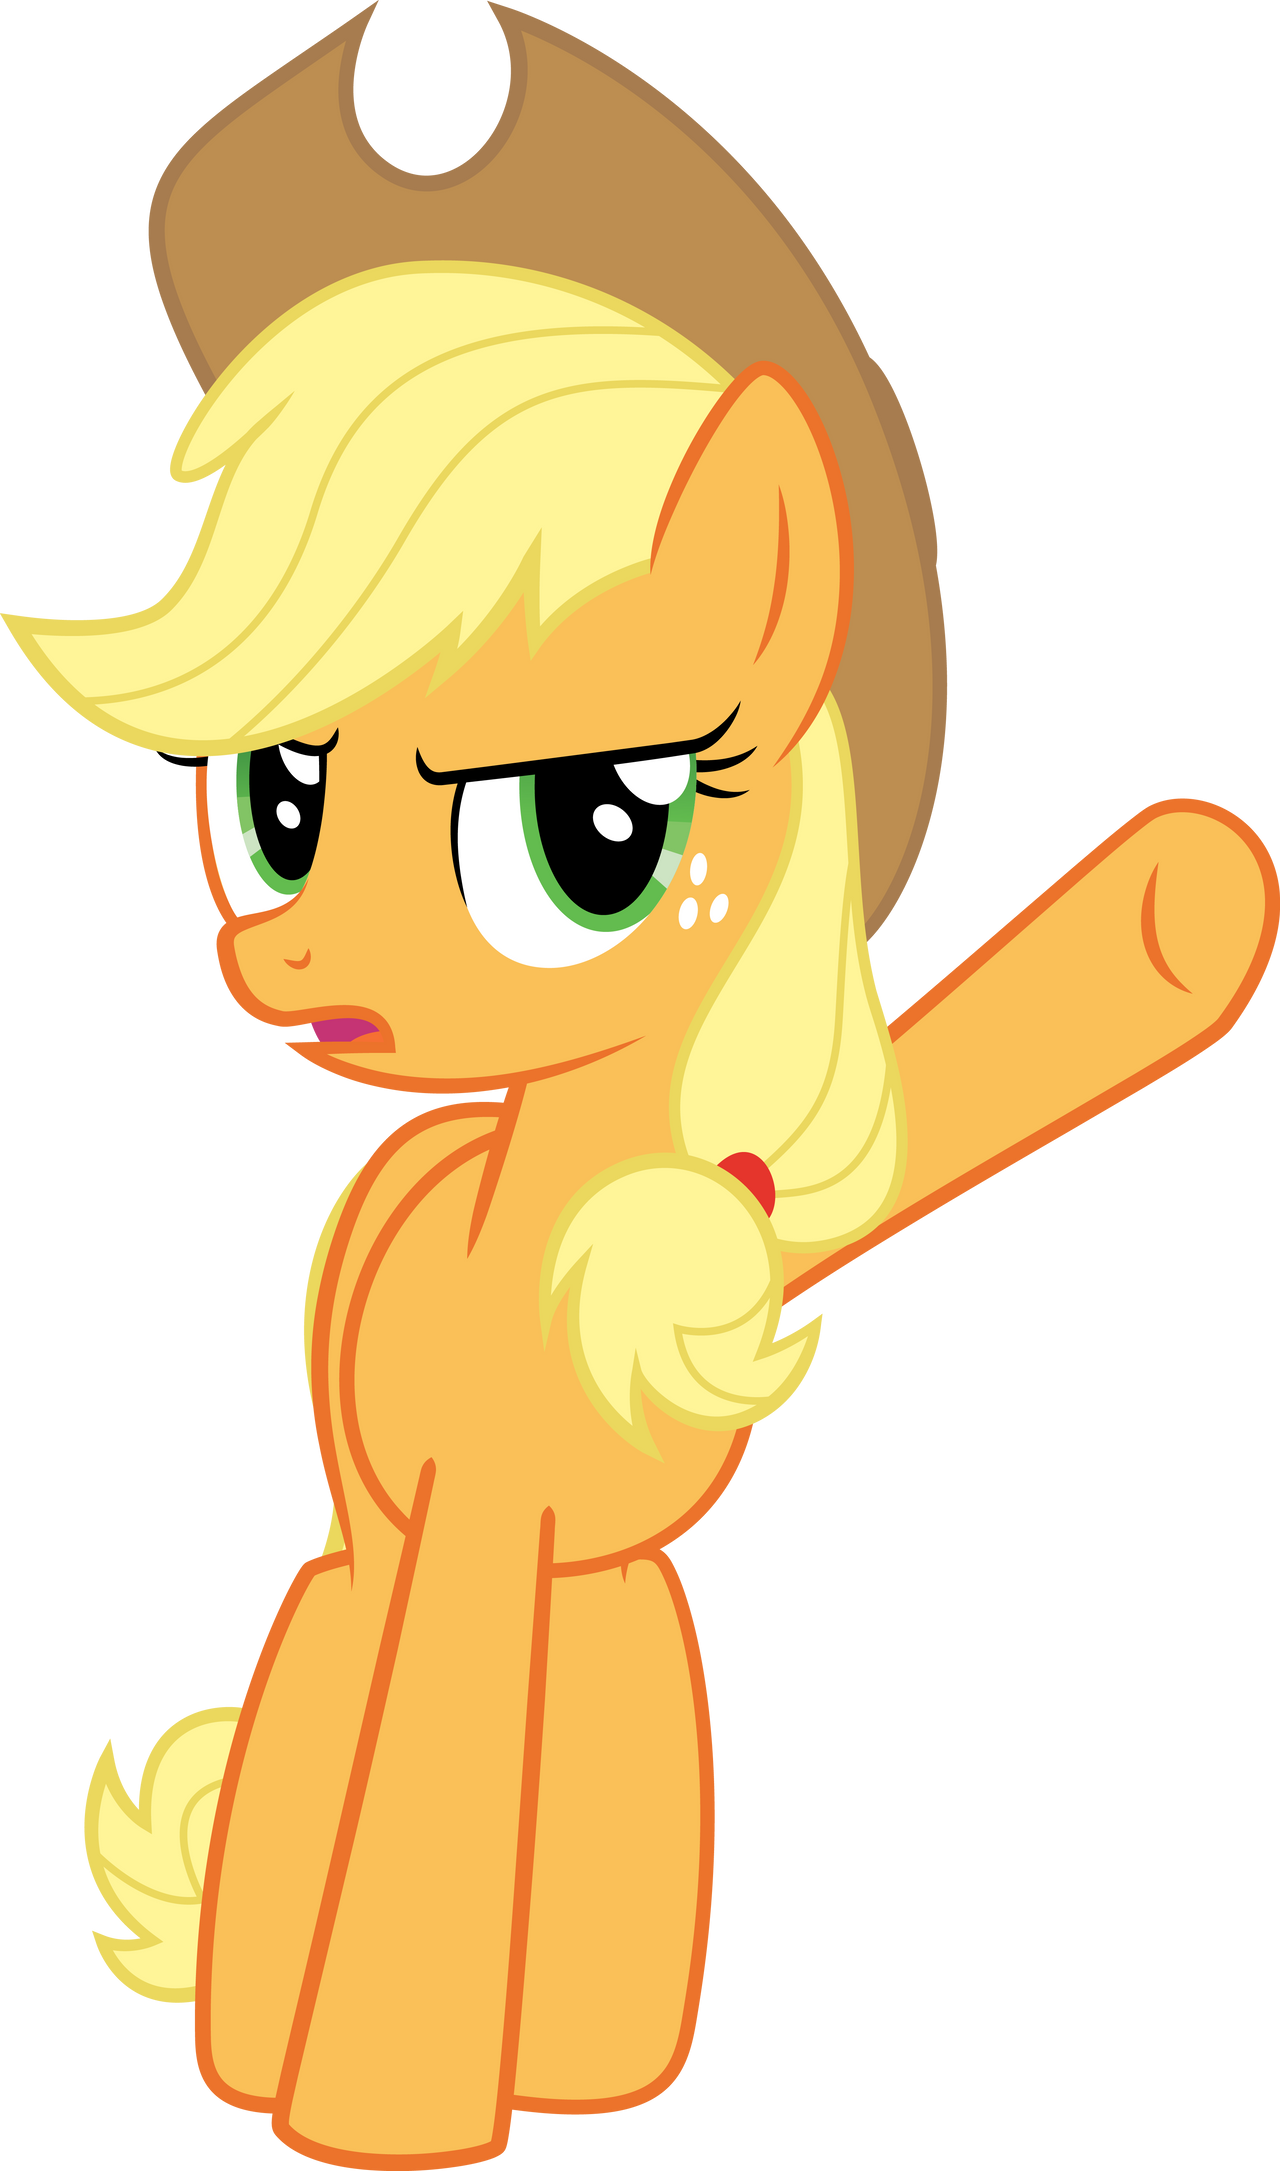 applejack___that_doesn__t_look_right__by